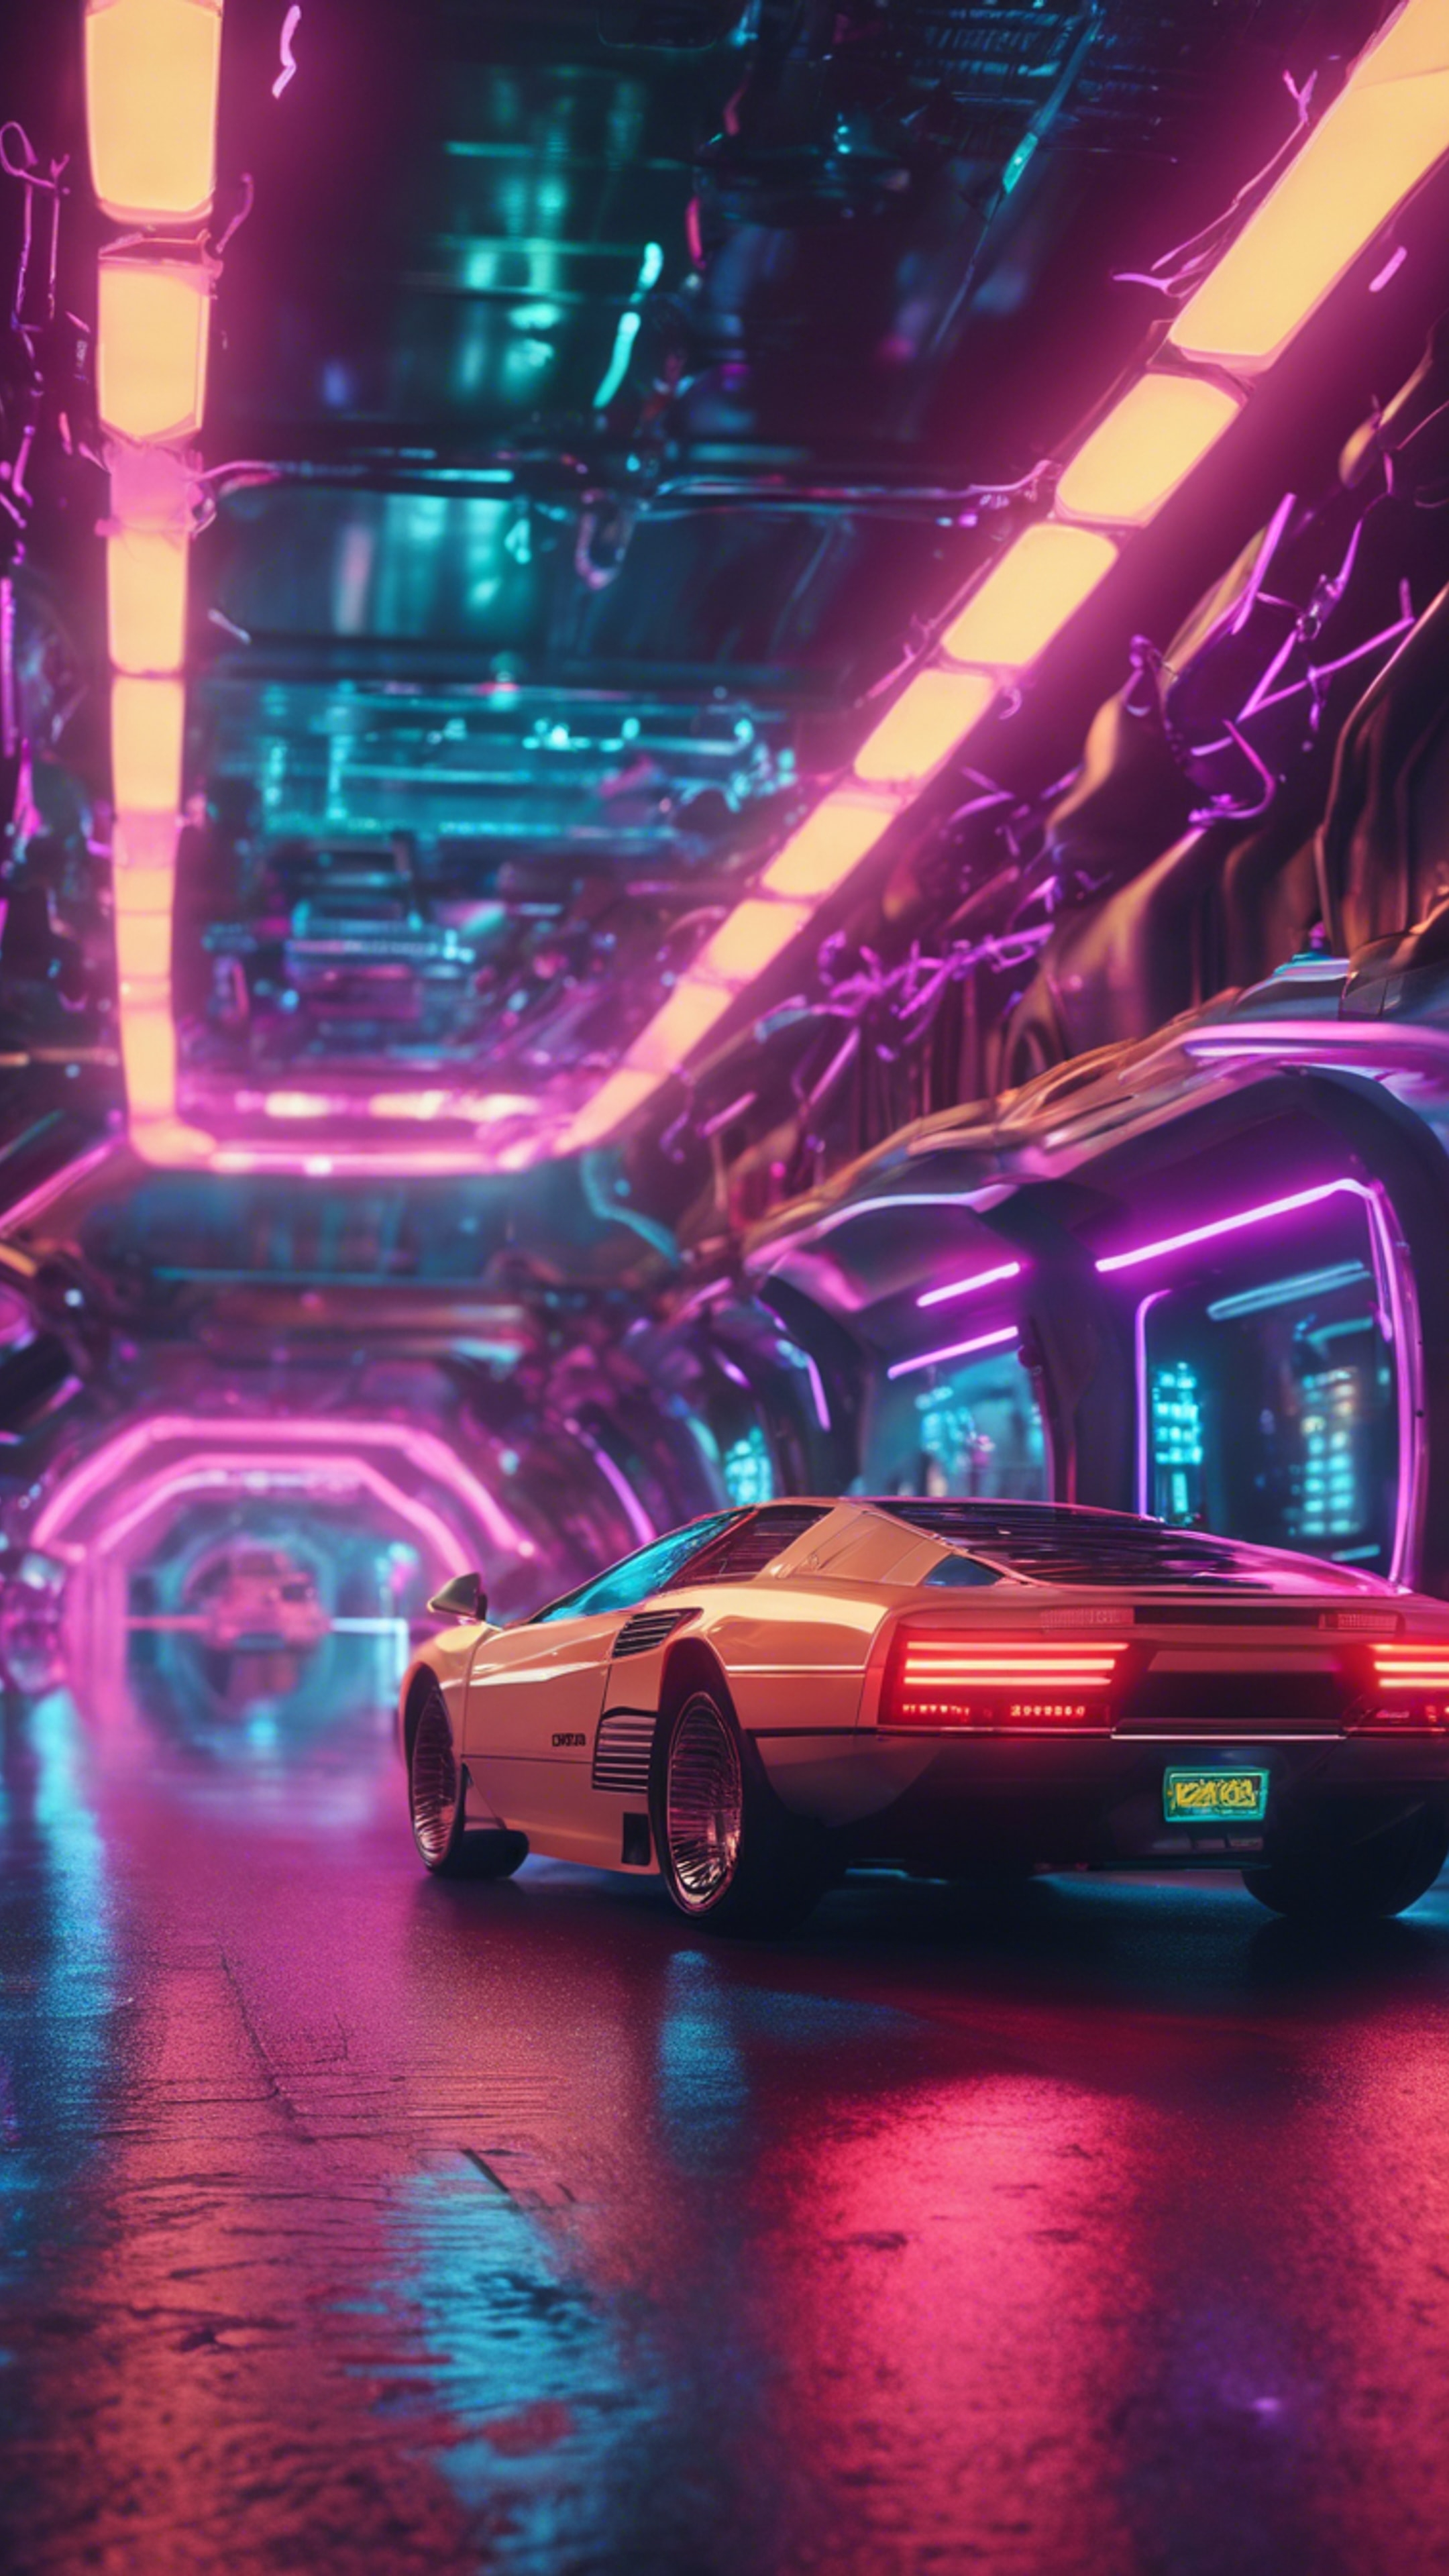 A Cyber-Y2K style chase scene with hover cars speeding through neon-lit tunnels. 벽지[a7b24e631c154bdda129]